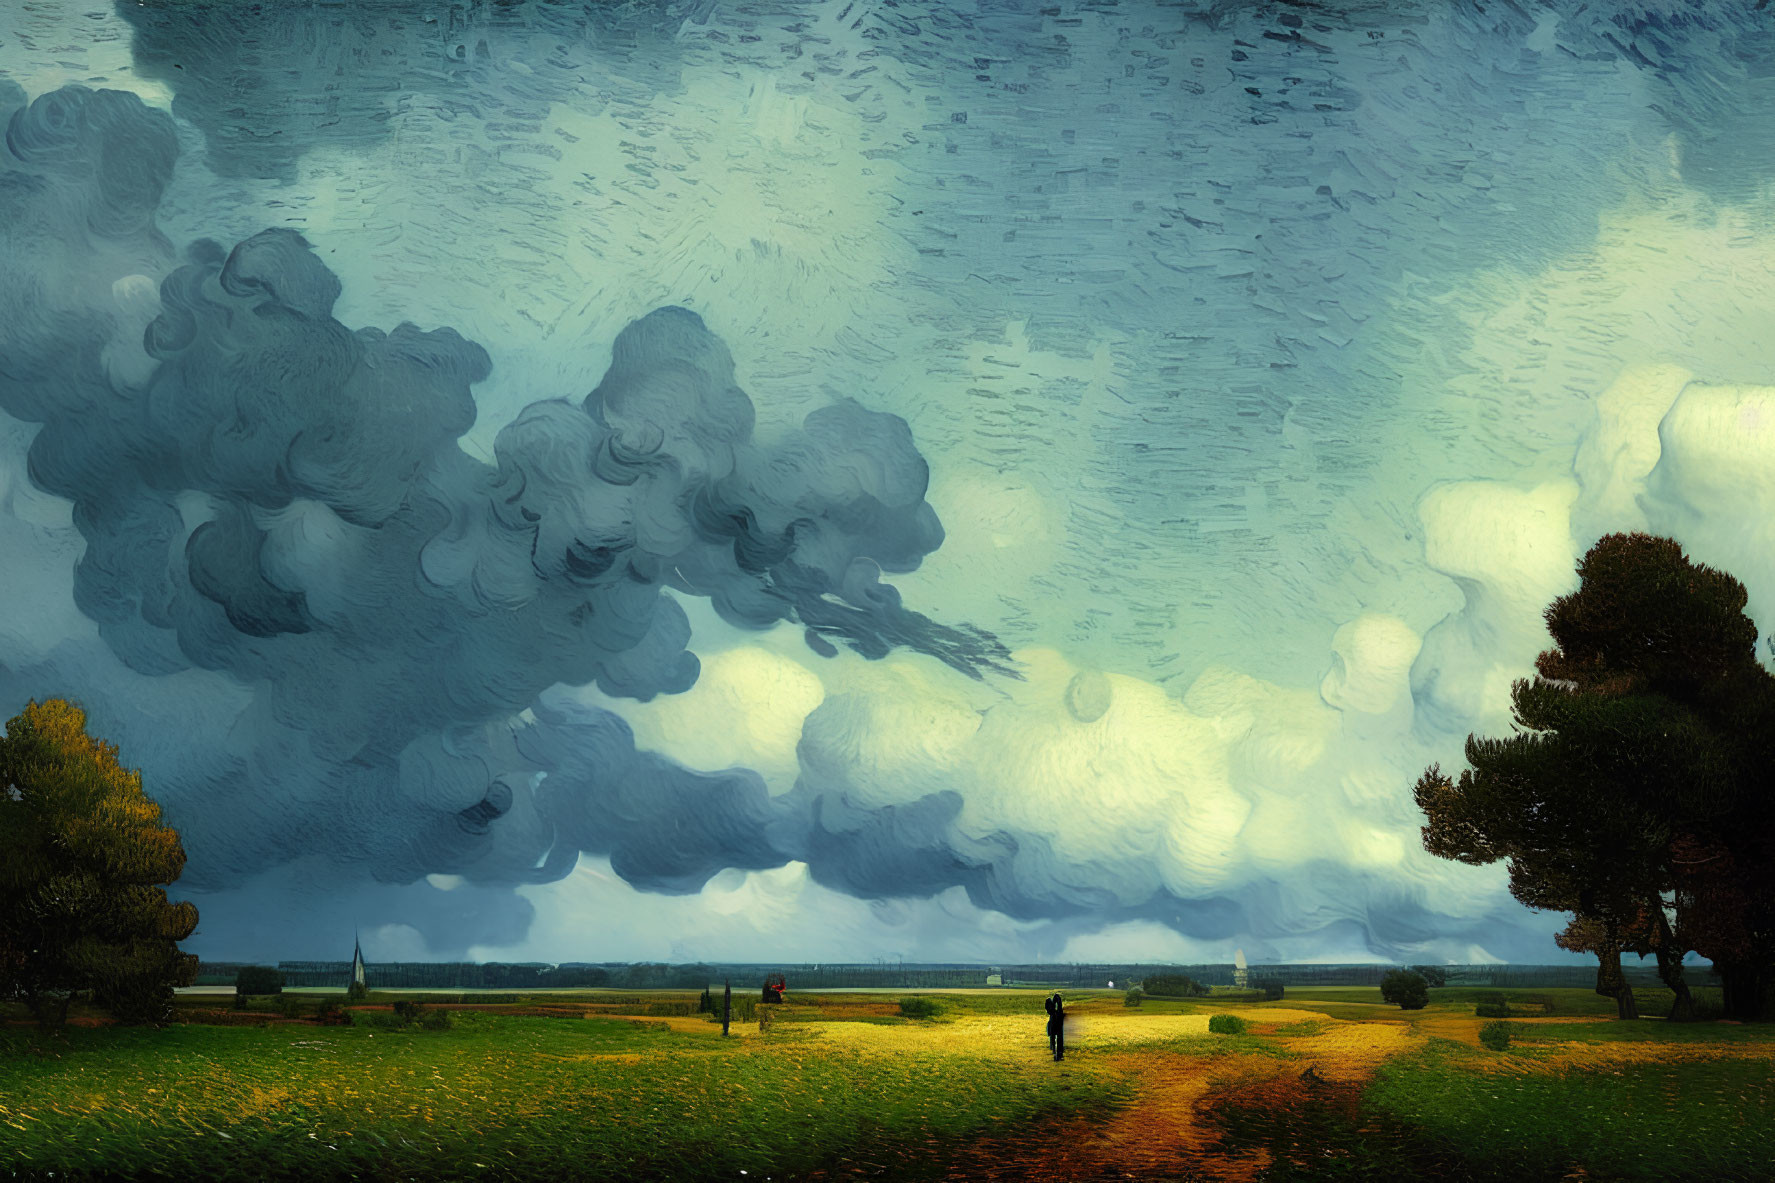 Dramatic swirling sky over green rustic landscape